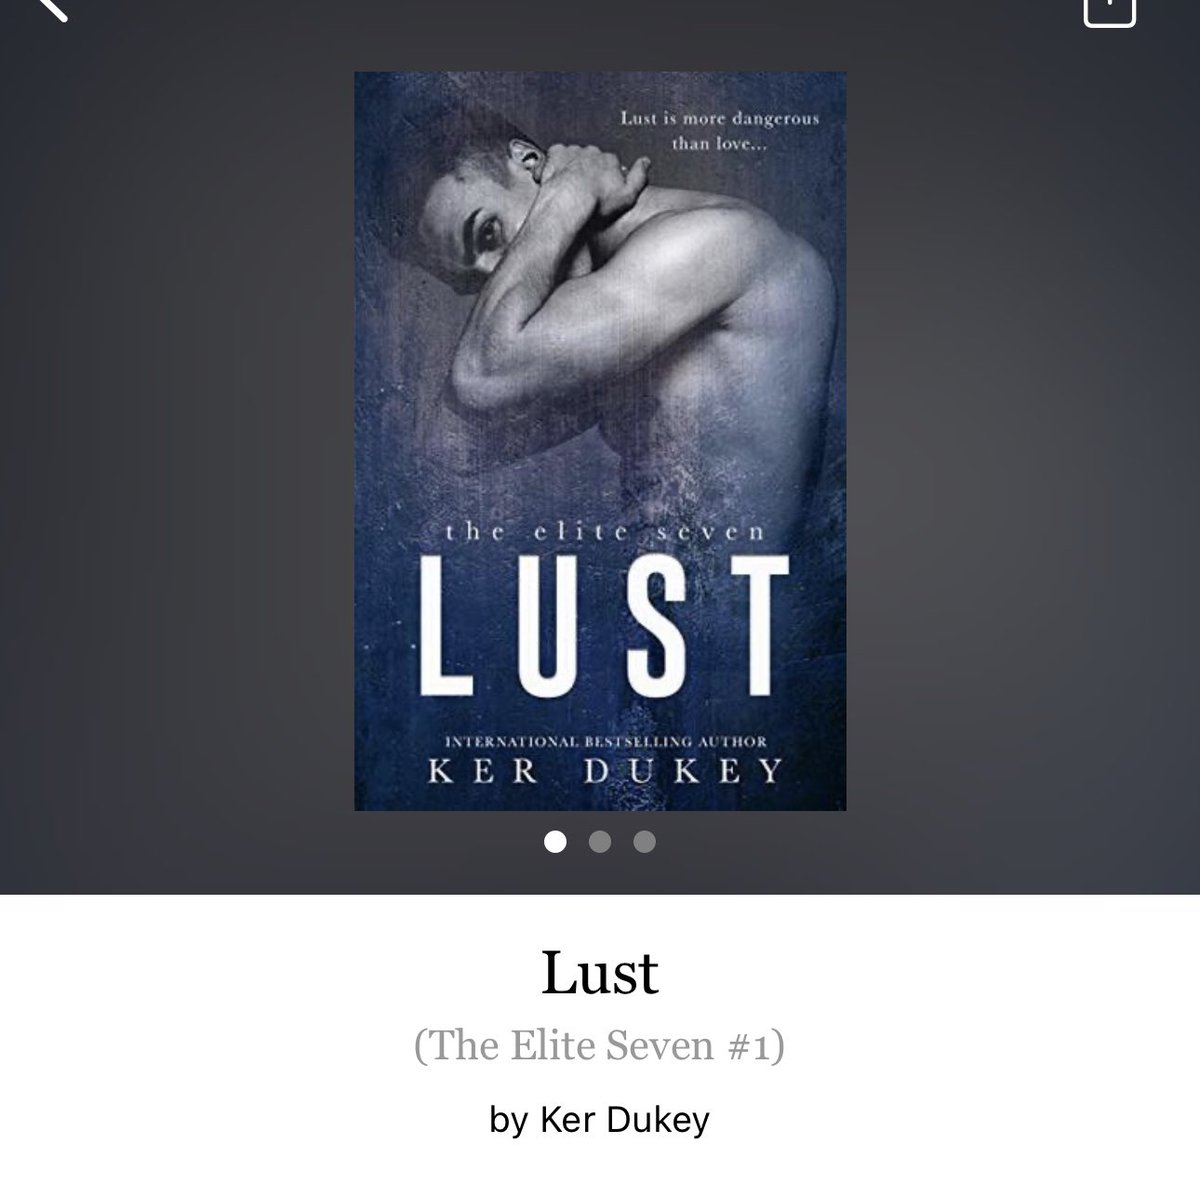 Lust by Ker Dukey  
 
#Lust  by #KerDukey #4884 #33chapters #229pages #may2023 #427of400 #6hourAudiobook #14for4 #Seris #TheEliteSevenSeries #Book1of7 #HCPL #clearingoffreadingshelves #whatsNext #readitquick